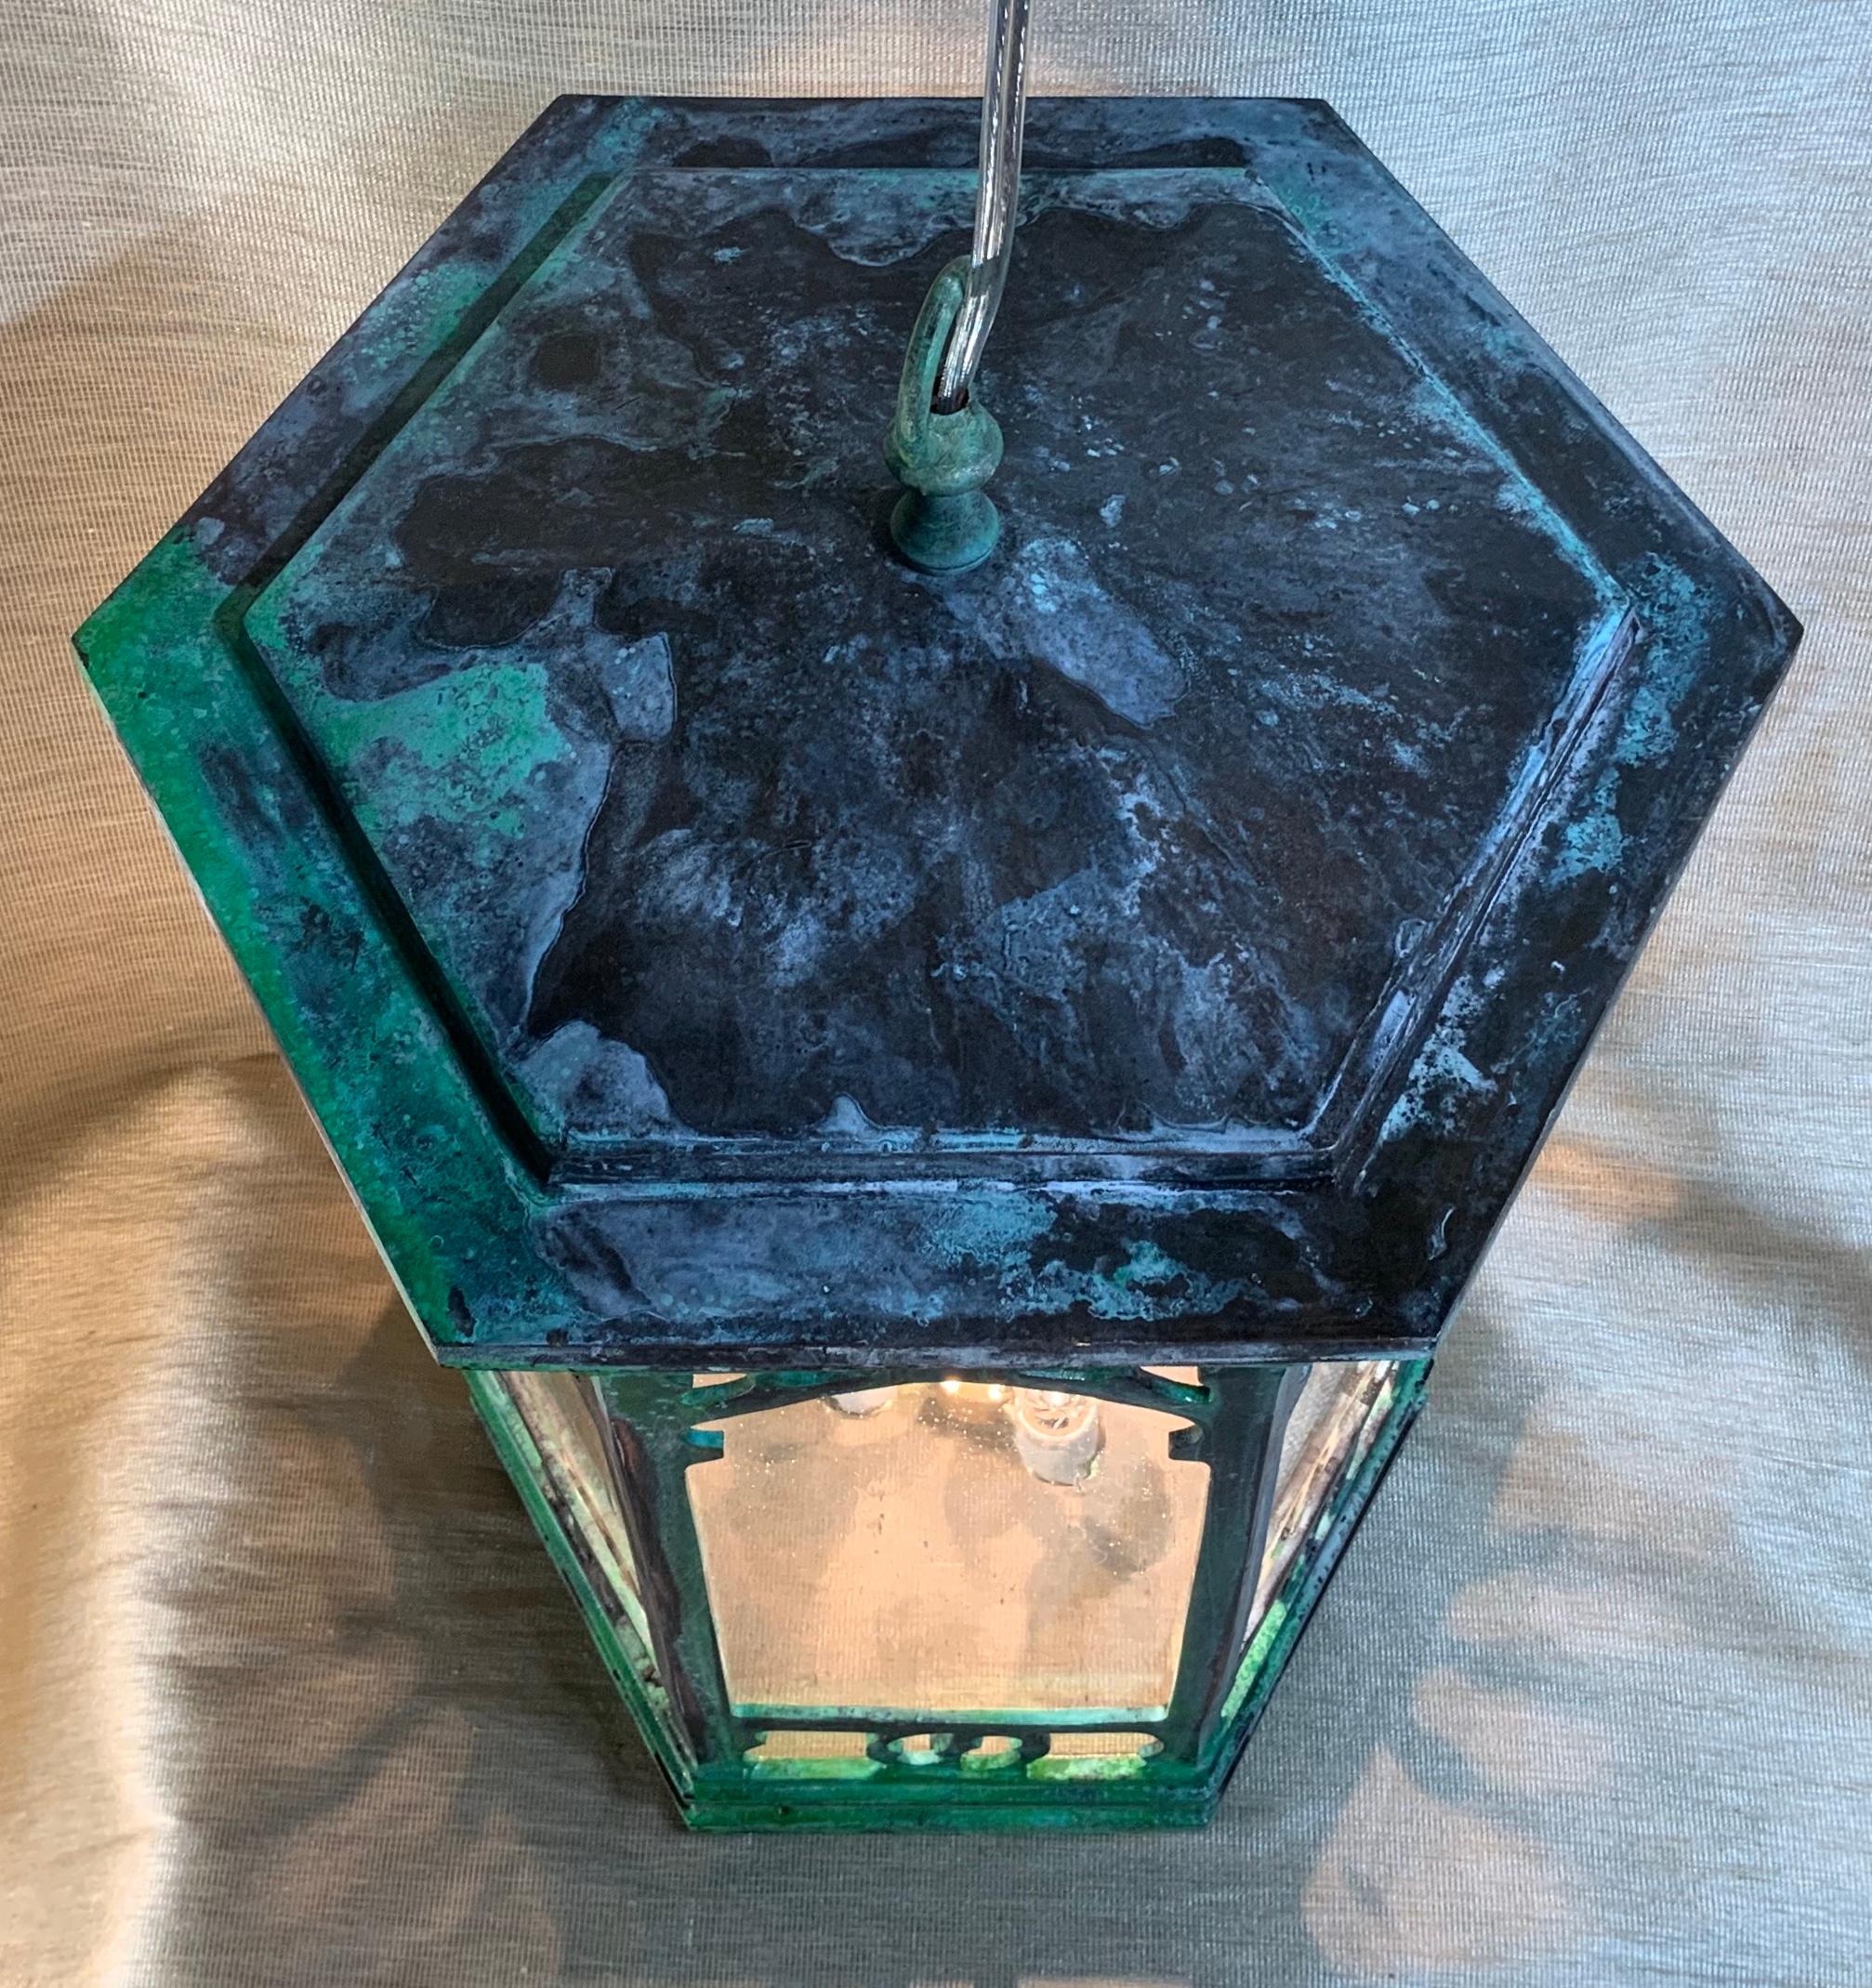 Elegant hanging lantern made of solid bronze with six sides seeded glass newly electrified with brass three 60/watt lights cluster. Brass canopy and chain included.
Could use indoor or outdoor.